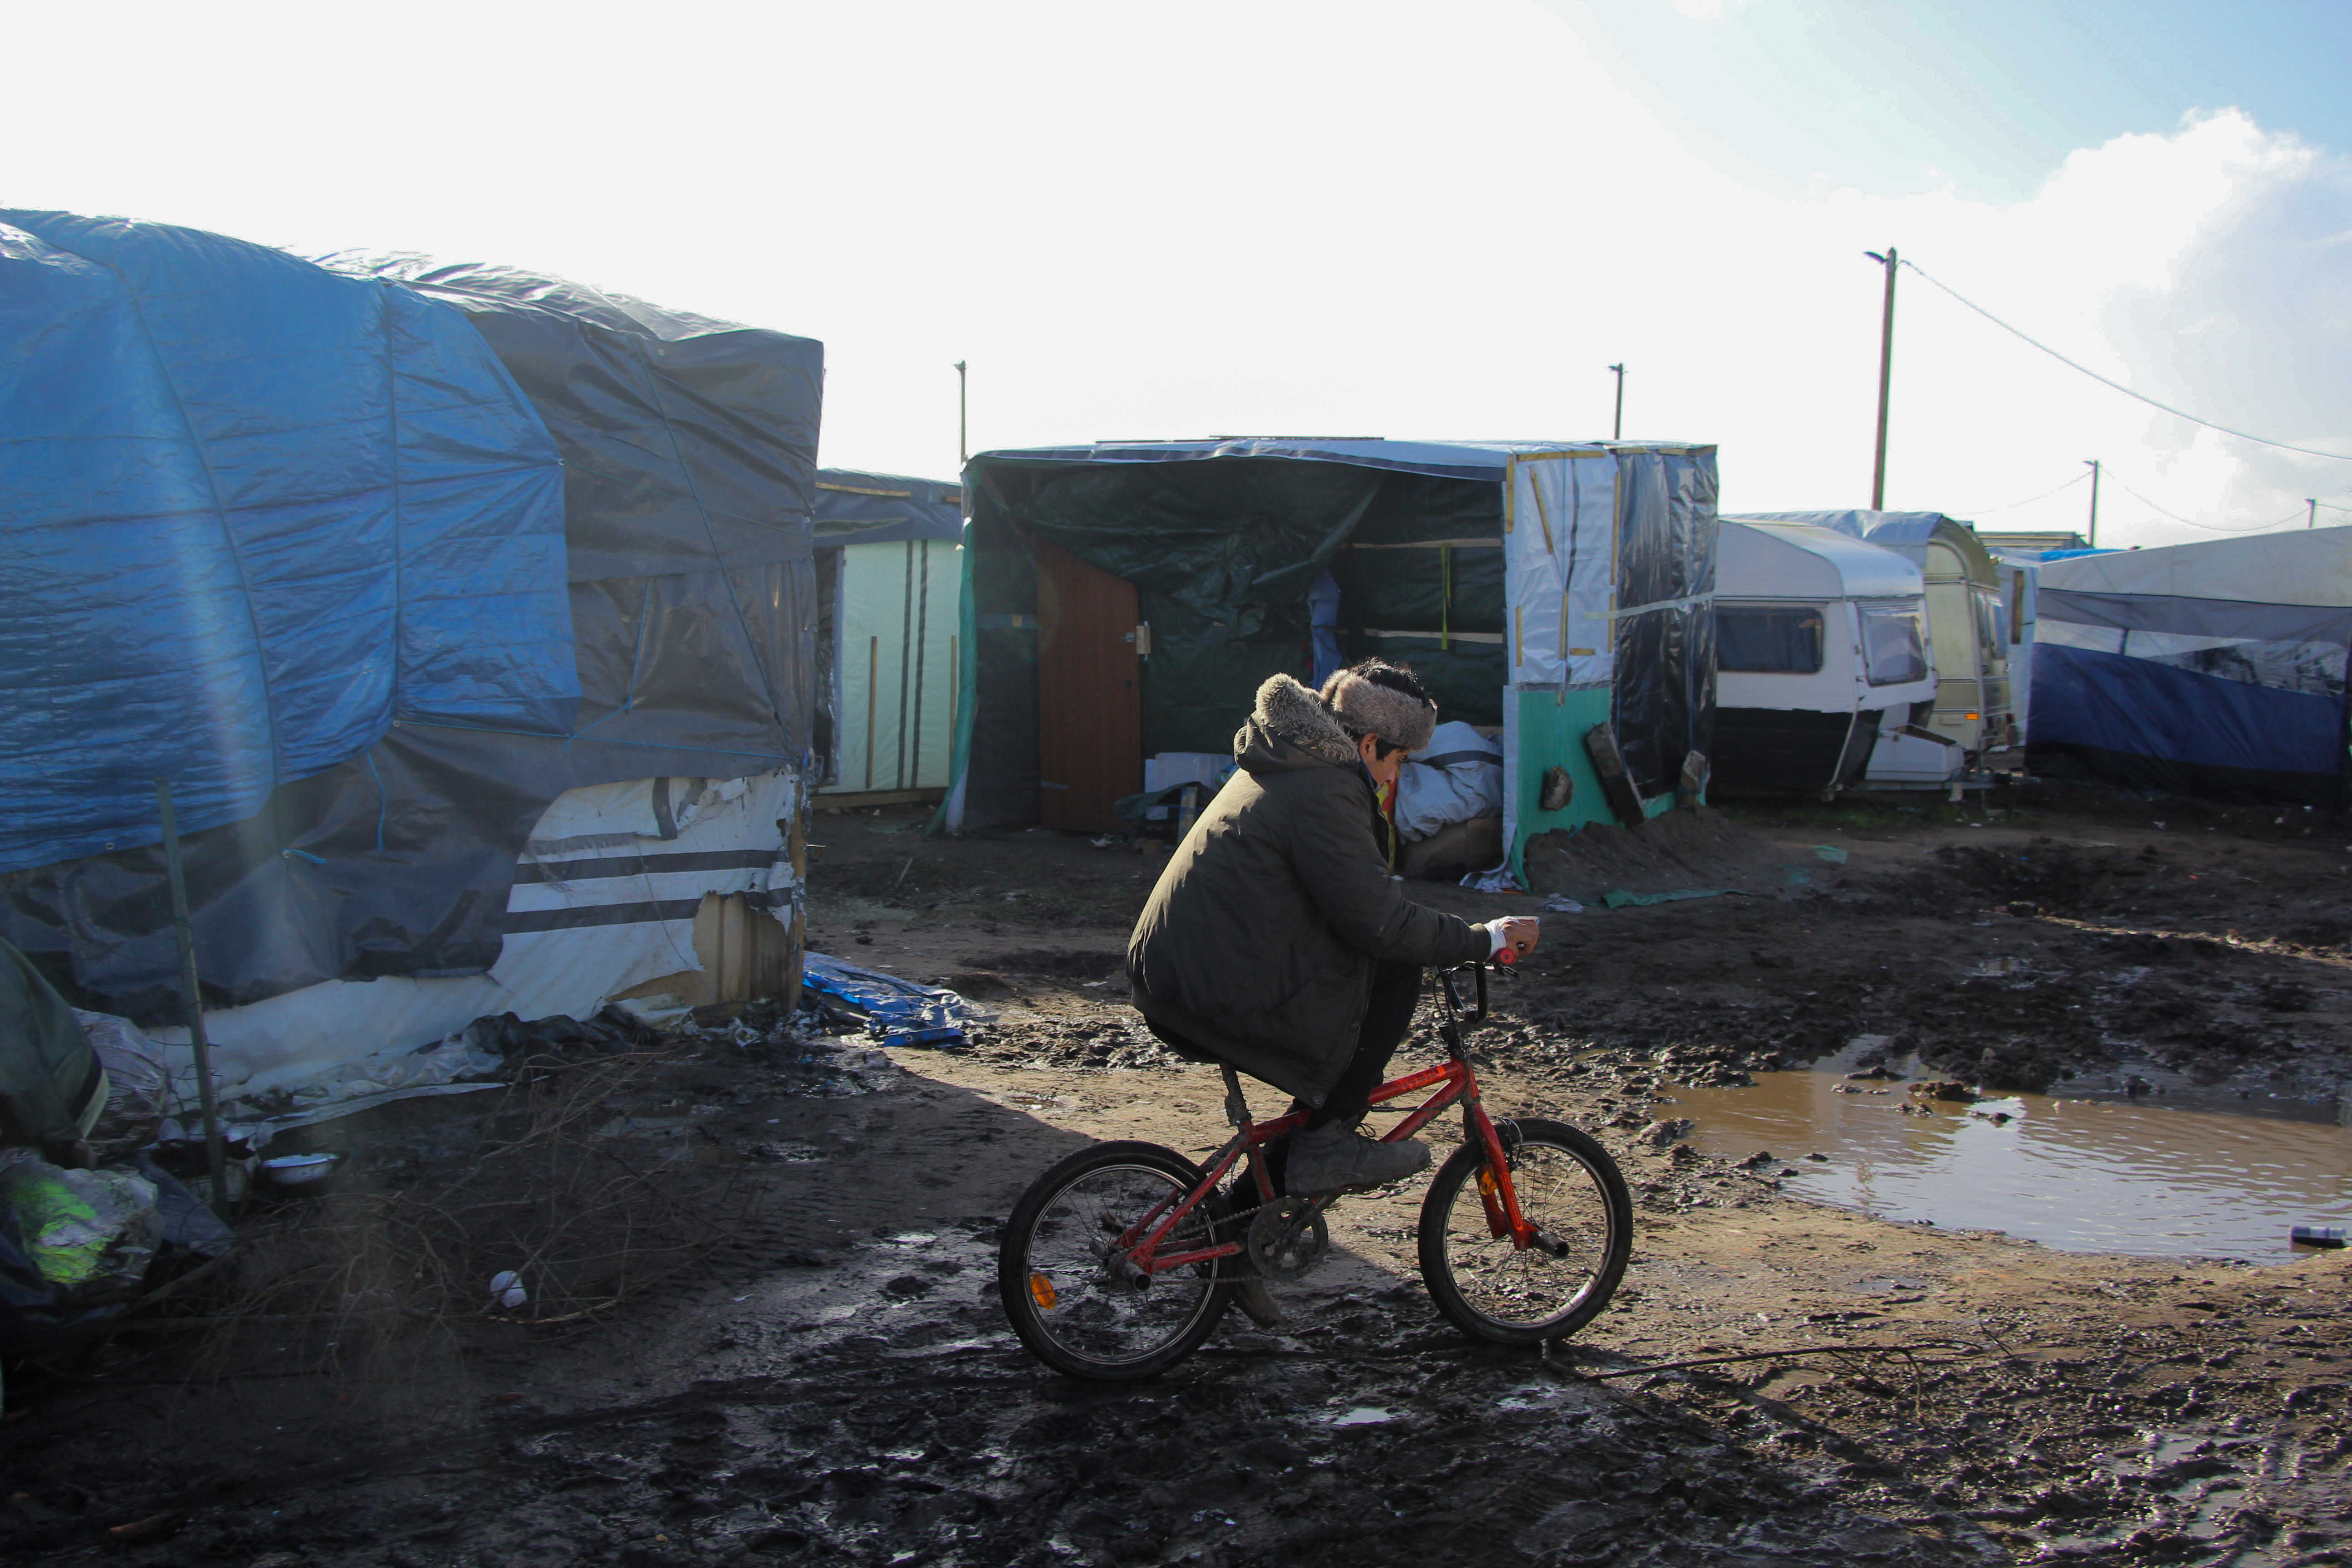 With severely inadequate infrastructure, transportation throughout the 4 square-kilometre settlement was difficult. Donated second hand bikes, such as the one pictured here, provided mobility as well as entertainment for those living within the camp.